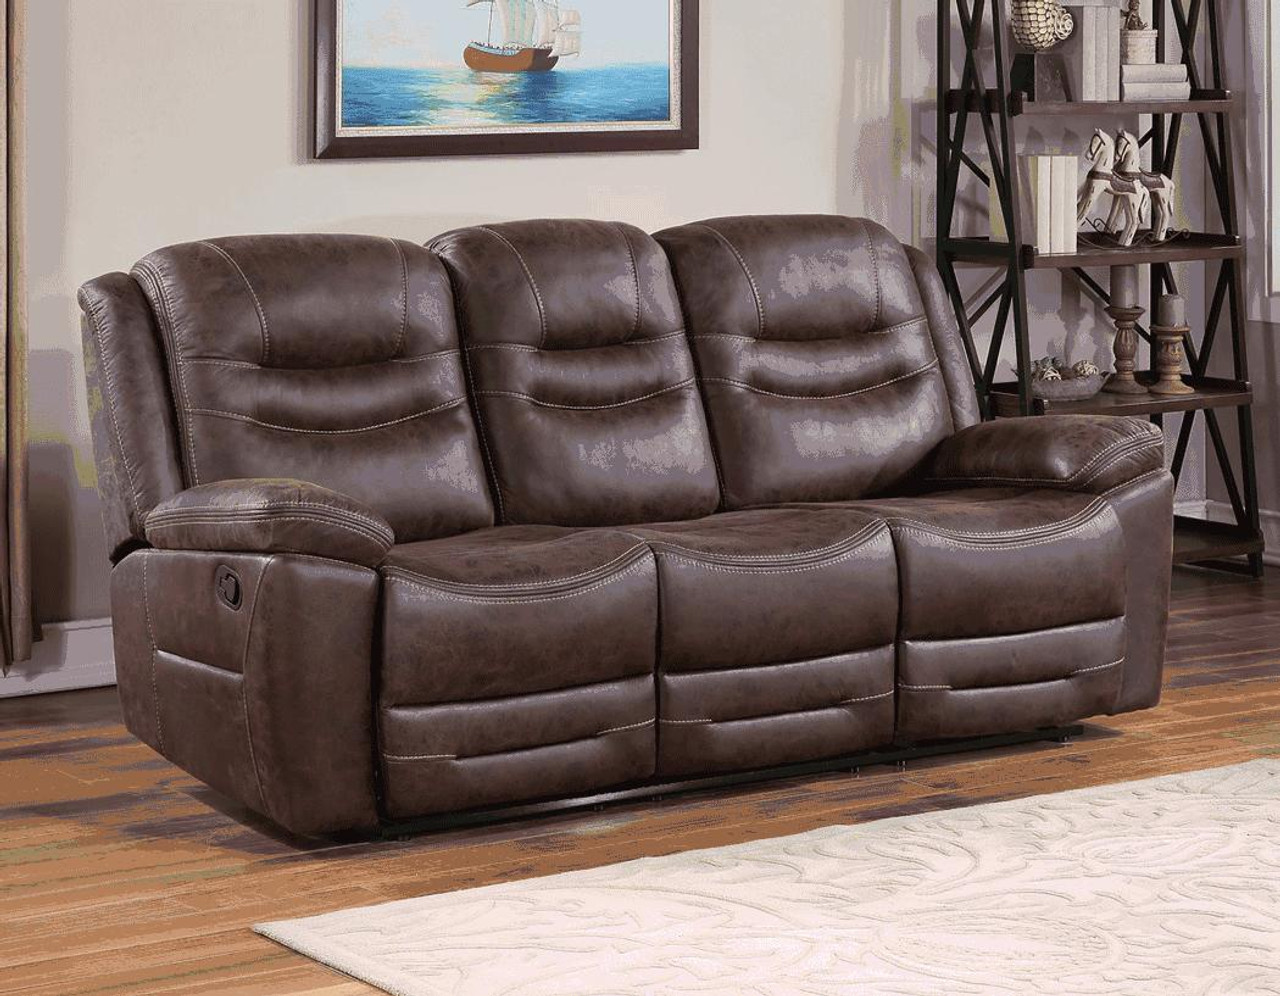 Faux Leather Sofa Recliner, Leather Sofa Recliner